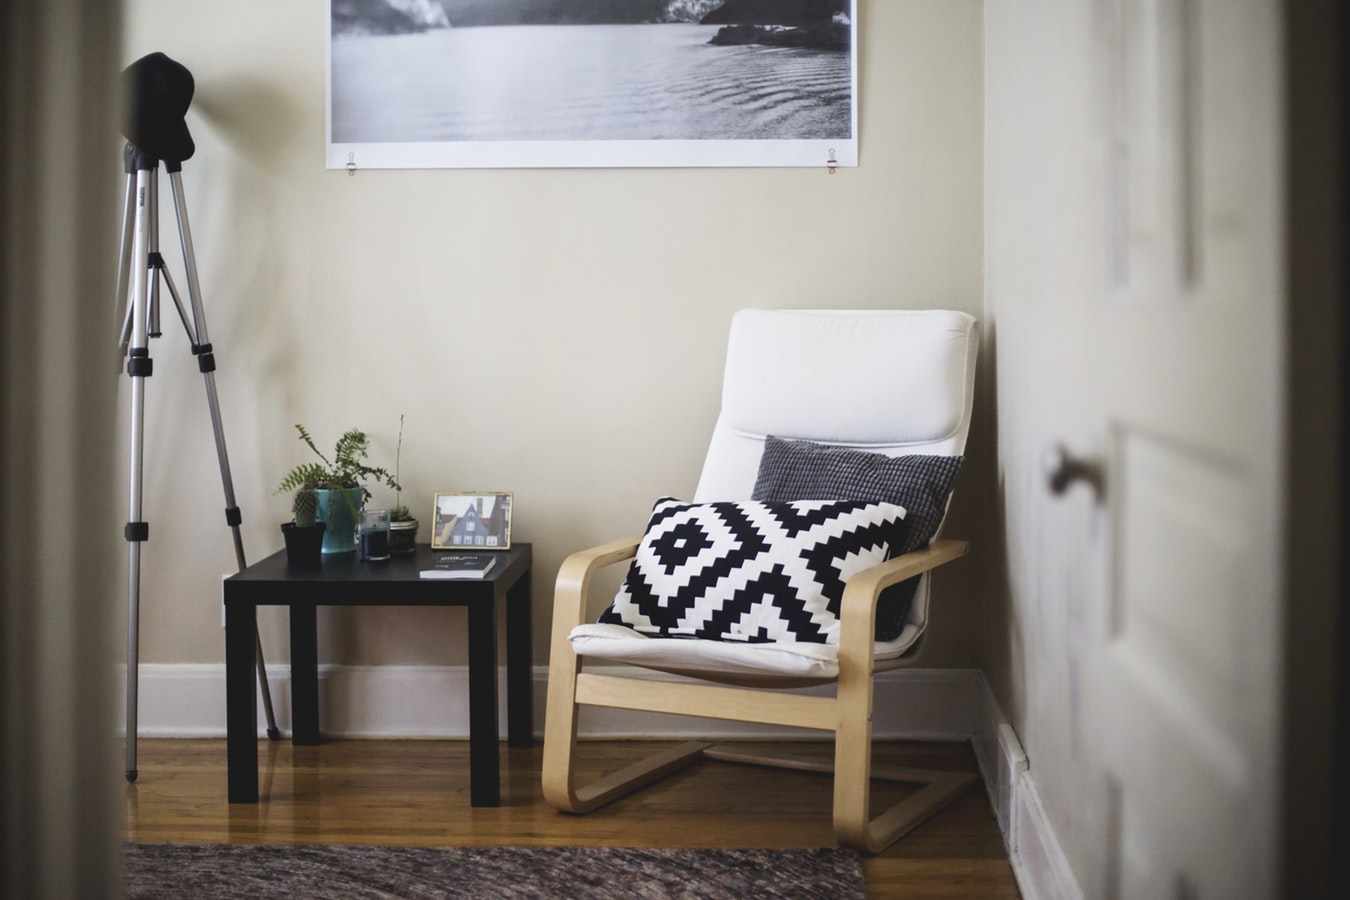 5 must-haves for decorating a student flat in Edinburgh